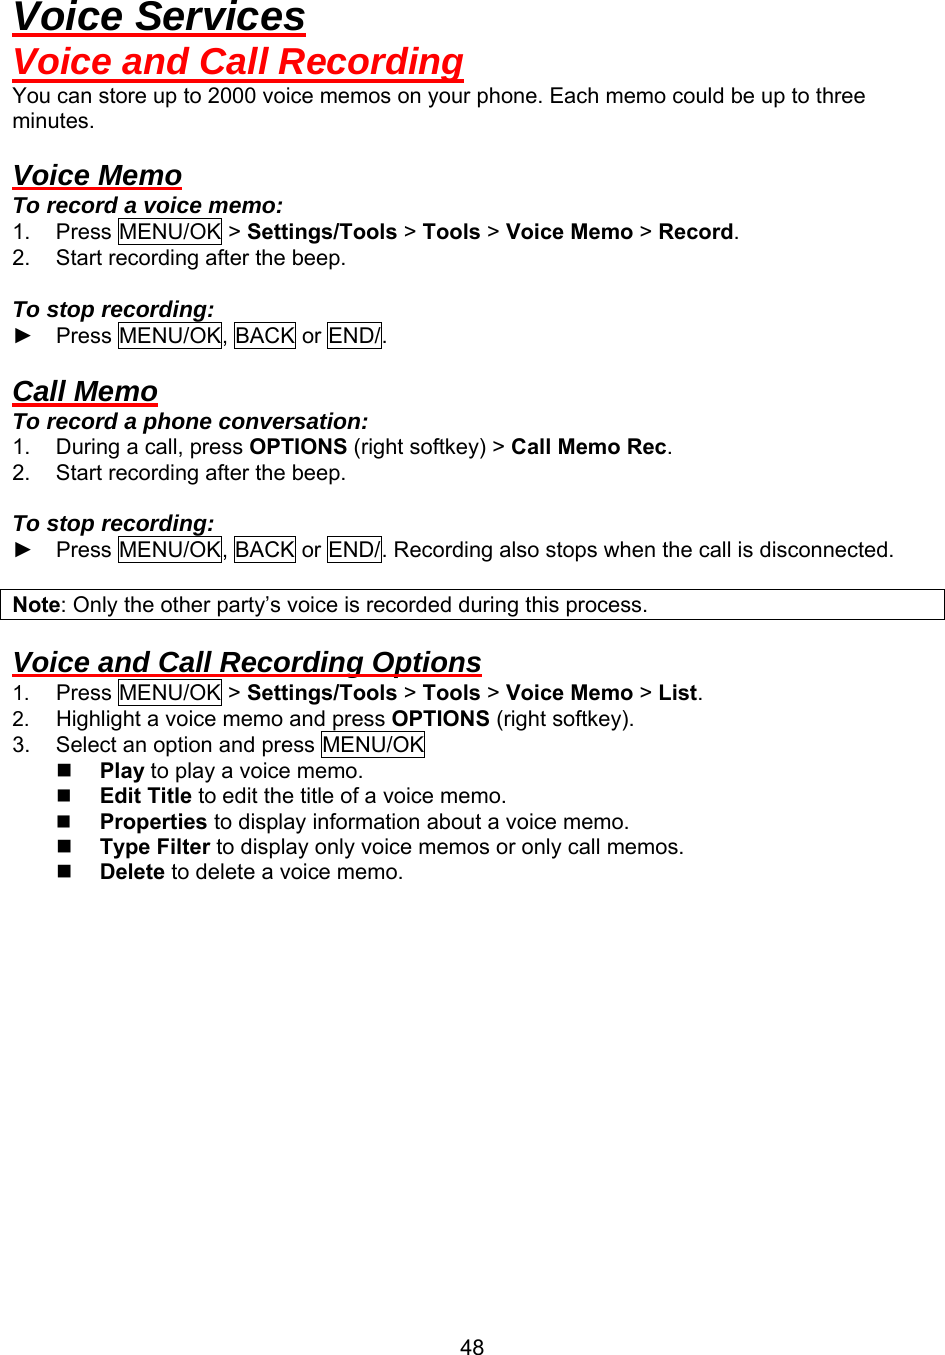  48Voice Services Voice and Call Recording You can store up to 2000 voice memos on your phone. Each memo could be up to three minutes.  Voice Memo To record a voice memo: 1. Press MENU/OK &gt; Settings/Tools &gt; Tools &gt; Voice Memo &gt; Record. 2.  Start recording after the beep.  To stop recording: ► Press MENU/OK, BACK or END/.  Call Memo To record a phone conversation: 1.  During a call, press OPTIONS (right softkey) &gt; Call Memo Rec. 2.  Start recording after the beep.  To stop recording: ► Press MENU/OK, BACK or END/. Recording also stops when the call is disconnected.  Note: Only the other party’s voice is recorded during this process.  Voice and Call Recording Options 1.  Press MENU/OK &gt; Settings/Tools &gt; Tools &gt; Voice Memo &gt; List. 2.  Highlight a voice memo and press OPTIONS (right softkey).  3.  Select an option and press MENU/OK   Play to play a voice memo.   Edit Title to edit the title of a voice memo.     Properties to display information about a voice memo.     Type Filter to display only voice memos or only call memos.     Delete to delete a voice memo.  